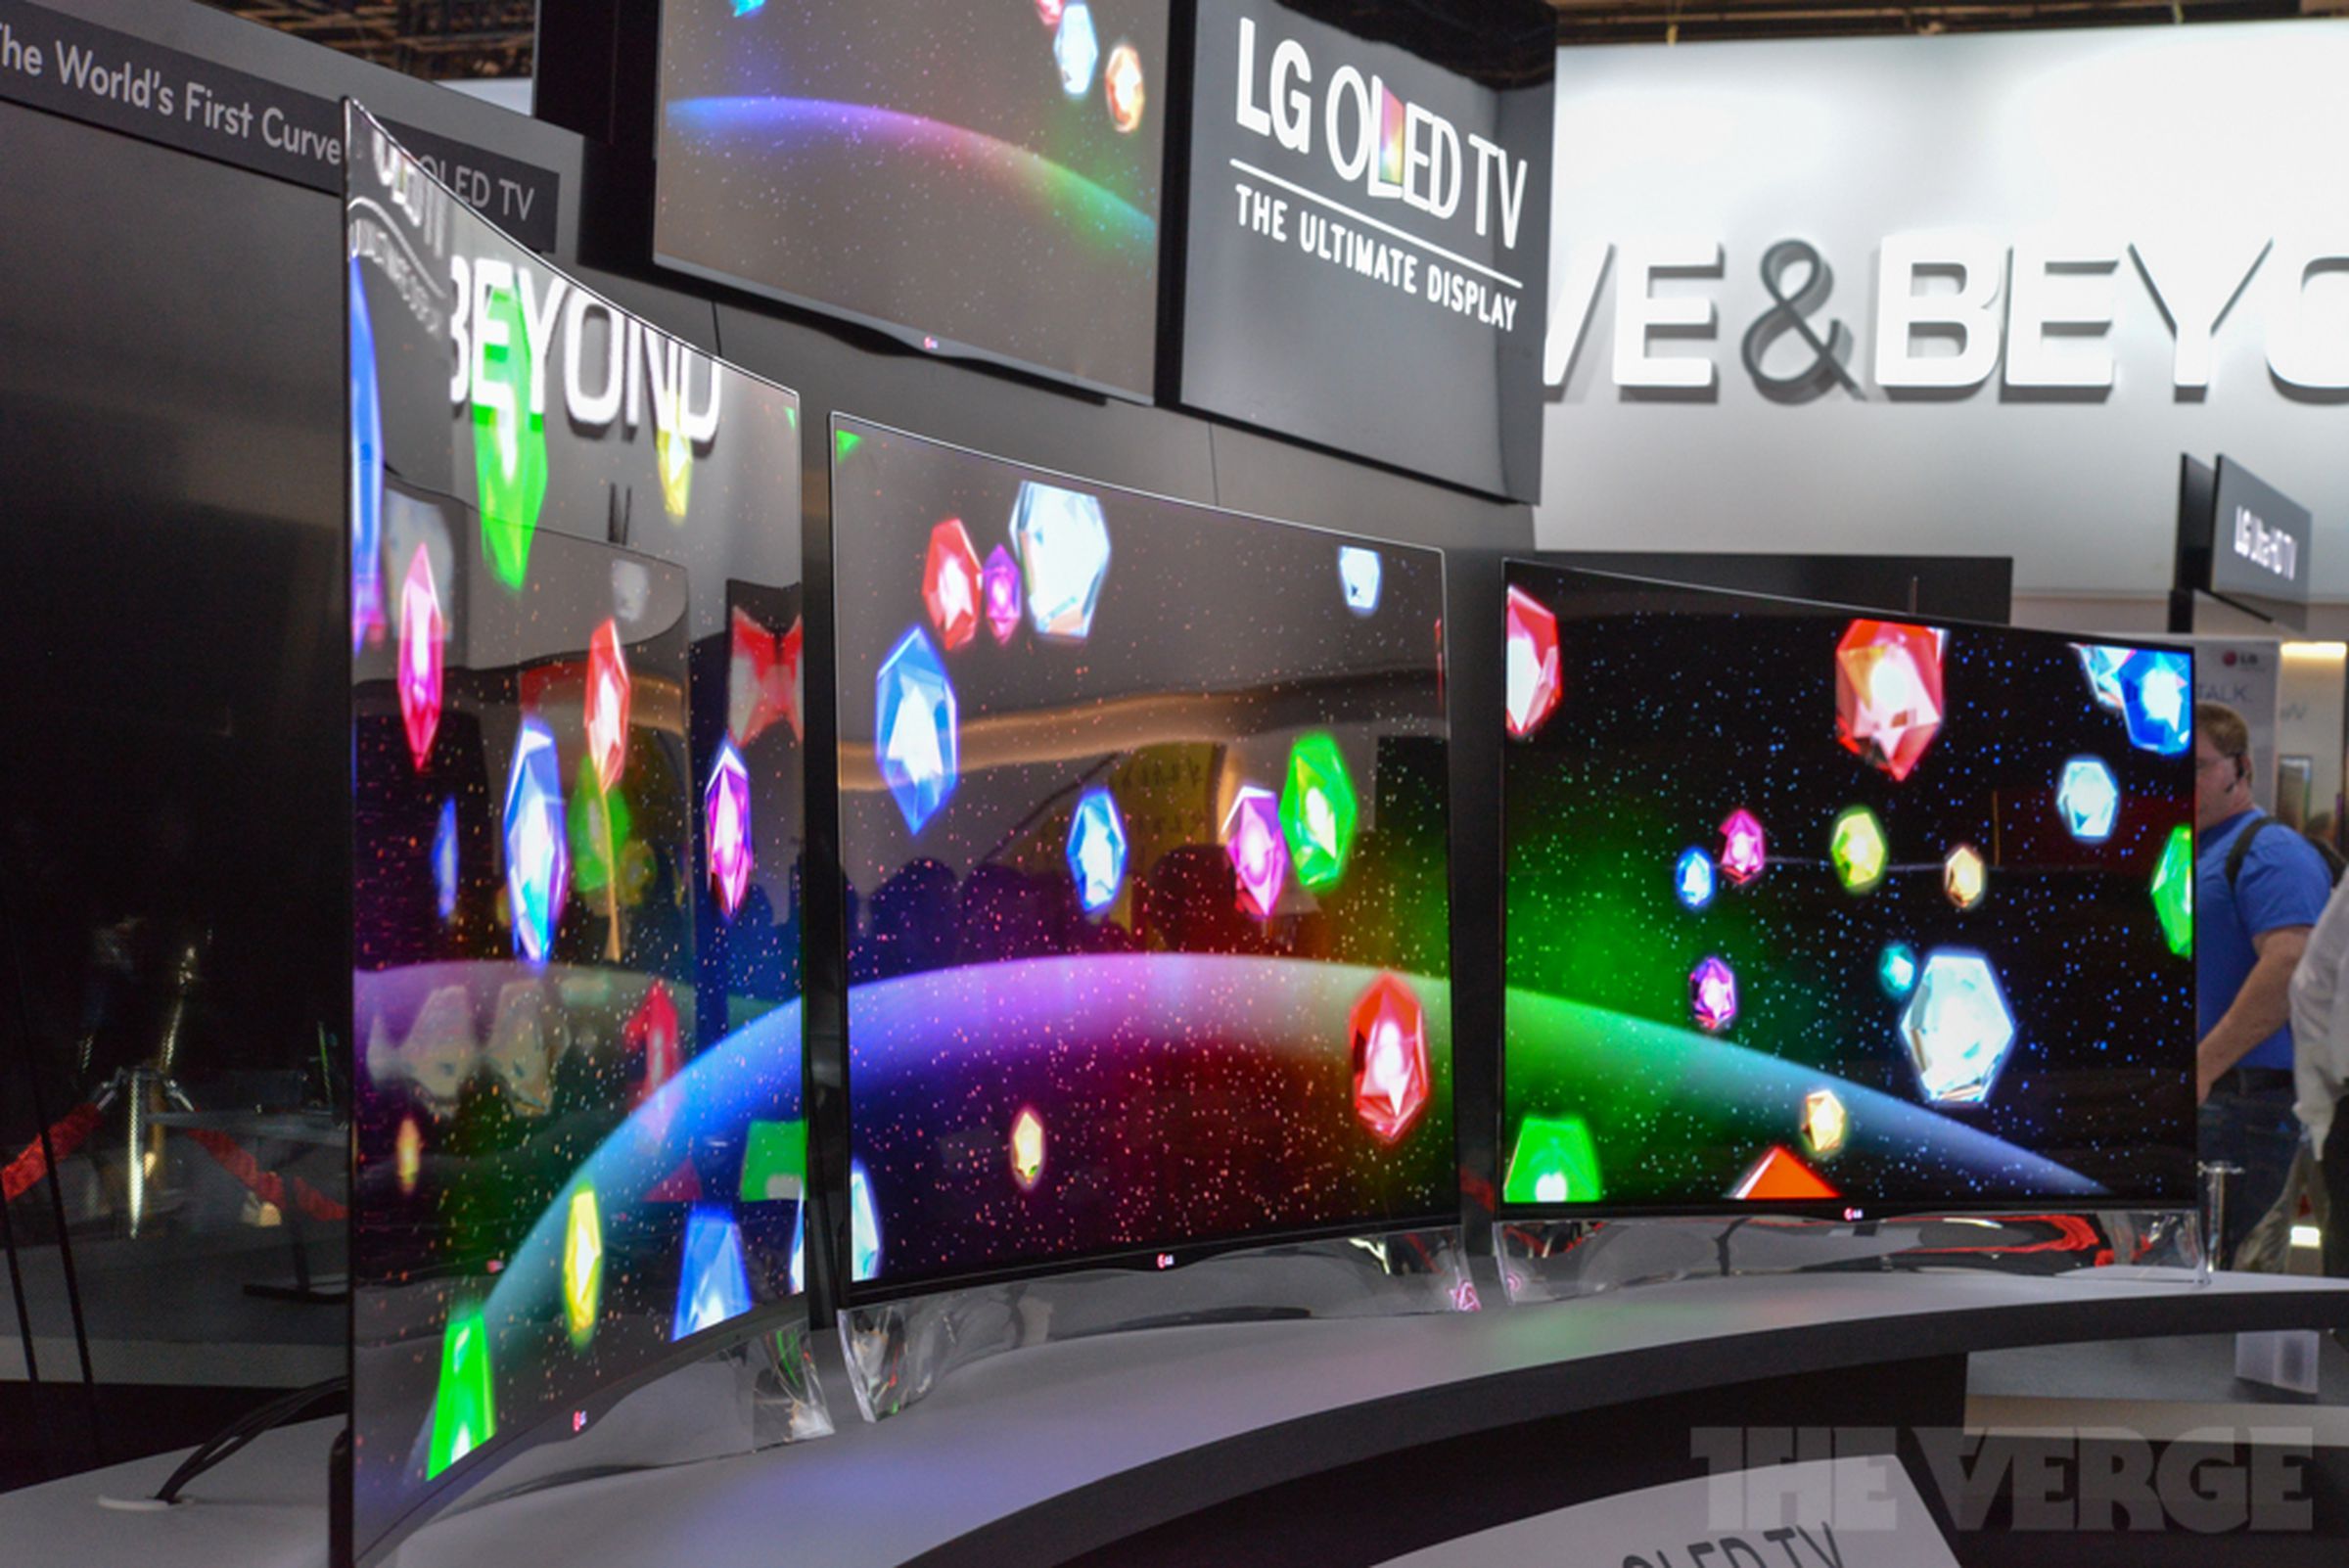 LG curved OLED TV hands-on pictures